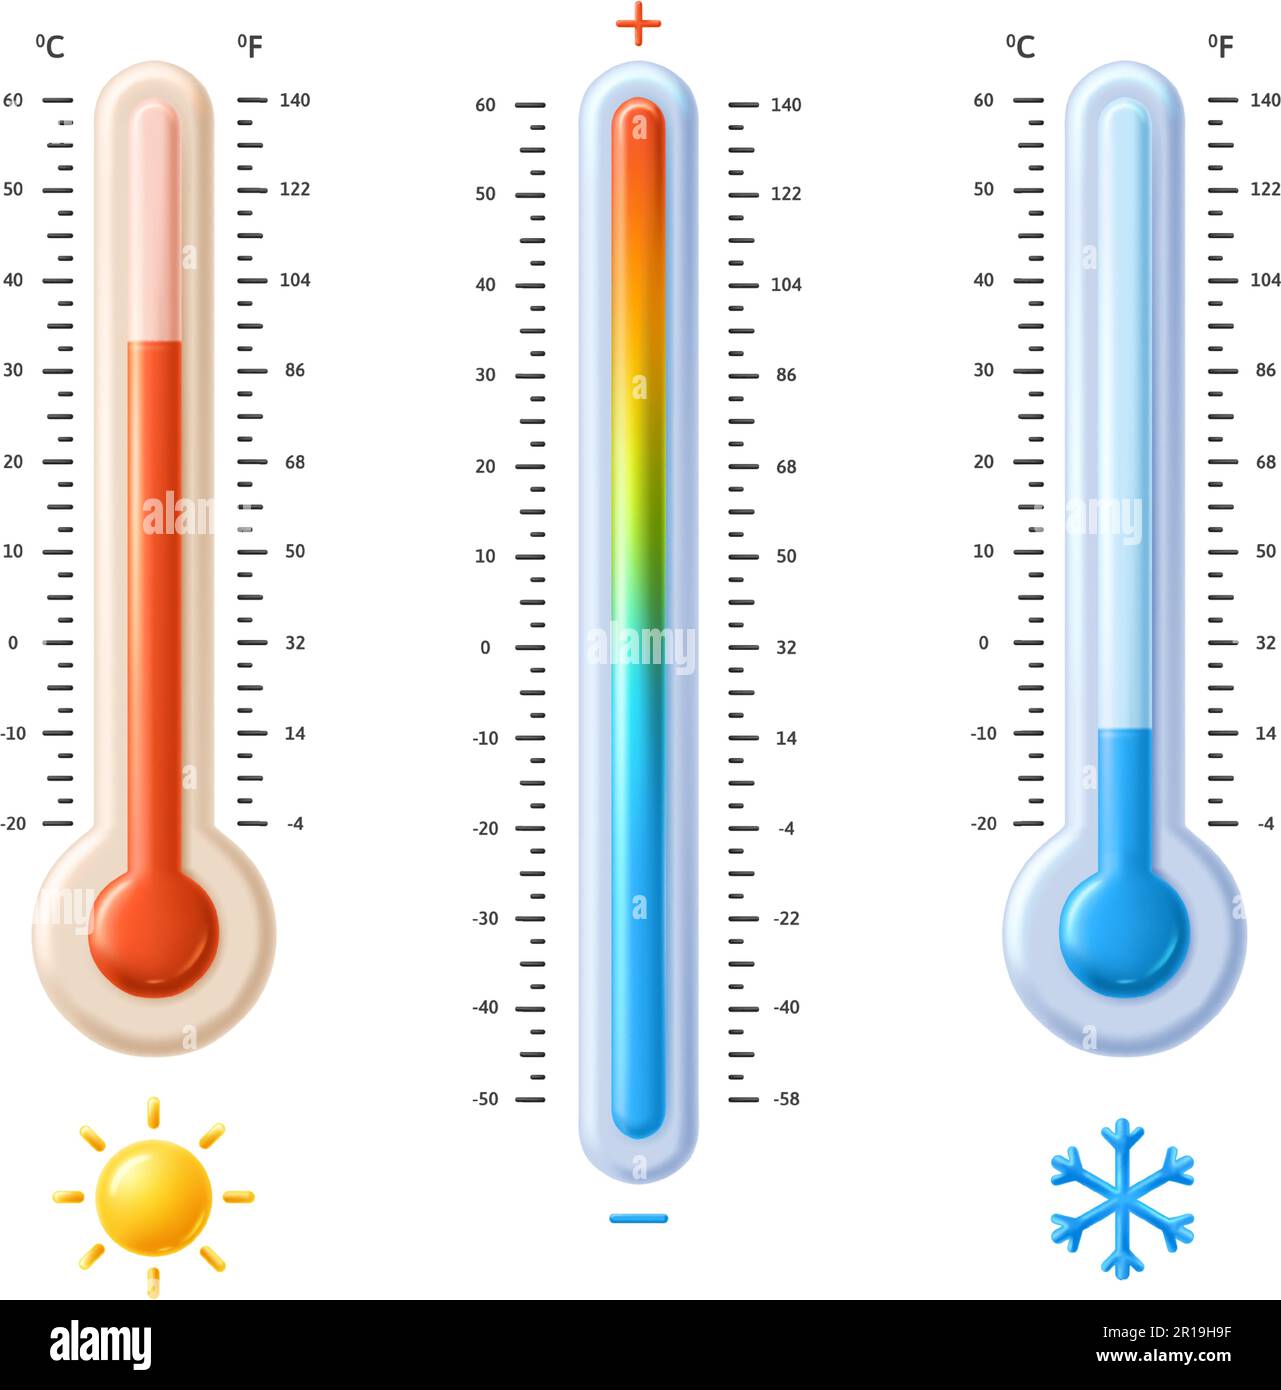 https://c8.alamy.com/comp/2R19H9F/fahrenheit-and-celsius-thermometers-temperature-spectrum-scale-with-hot-sun-and-cold-snowflake-icons-weather-meteorology-measurement-flat-3d-vector-2R19H9F.jpg